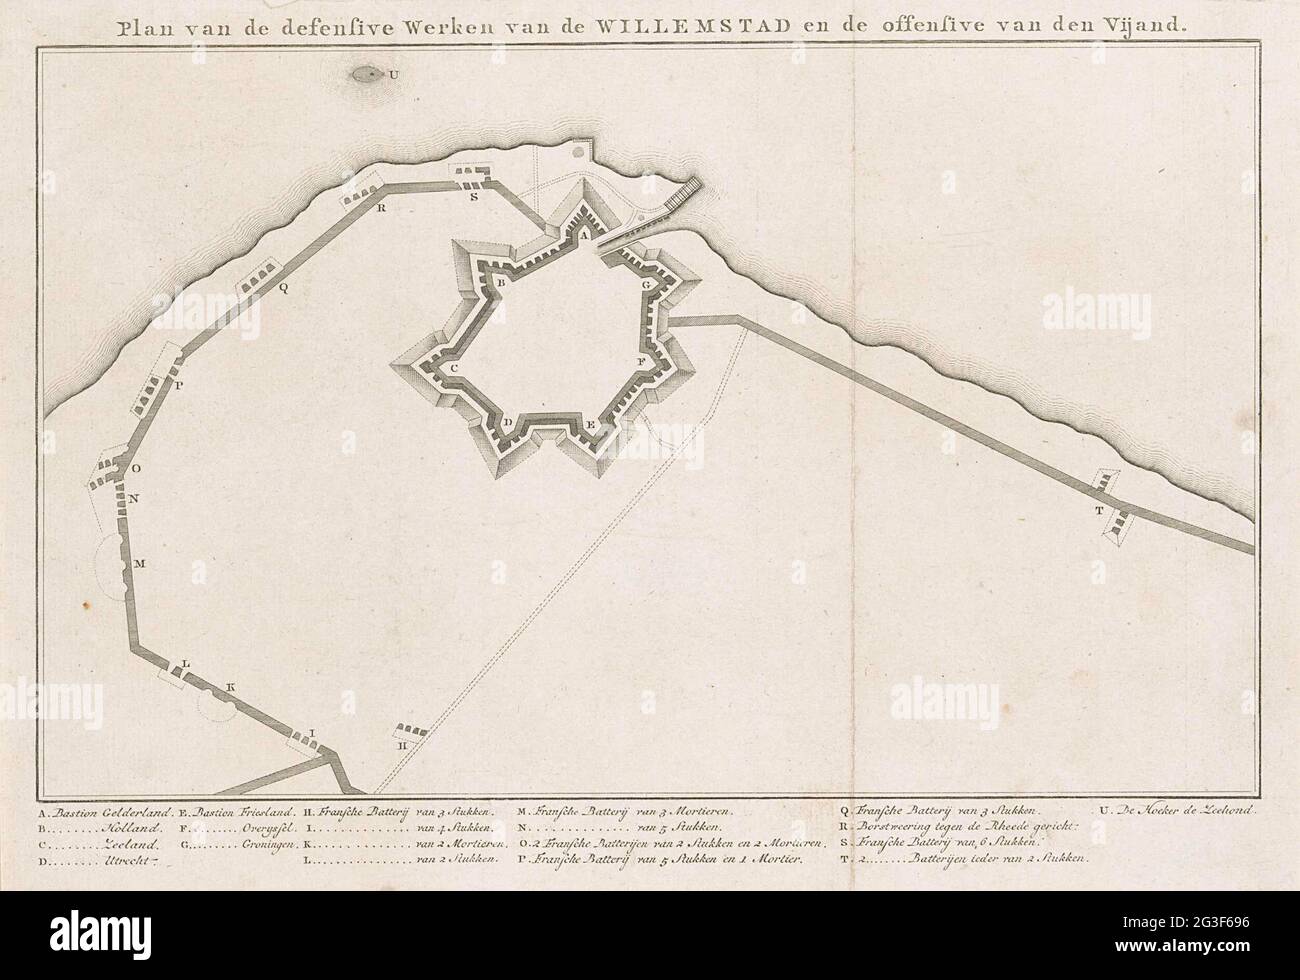 Plan of the Fortifications of Willemstad, 1793; Plan of the defense works  by the Willemstad and the Offensive of the enemy. Map of the Fortifications  of Willemstad and the positions of the